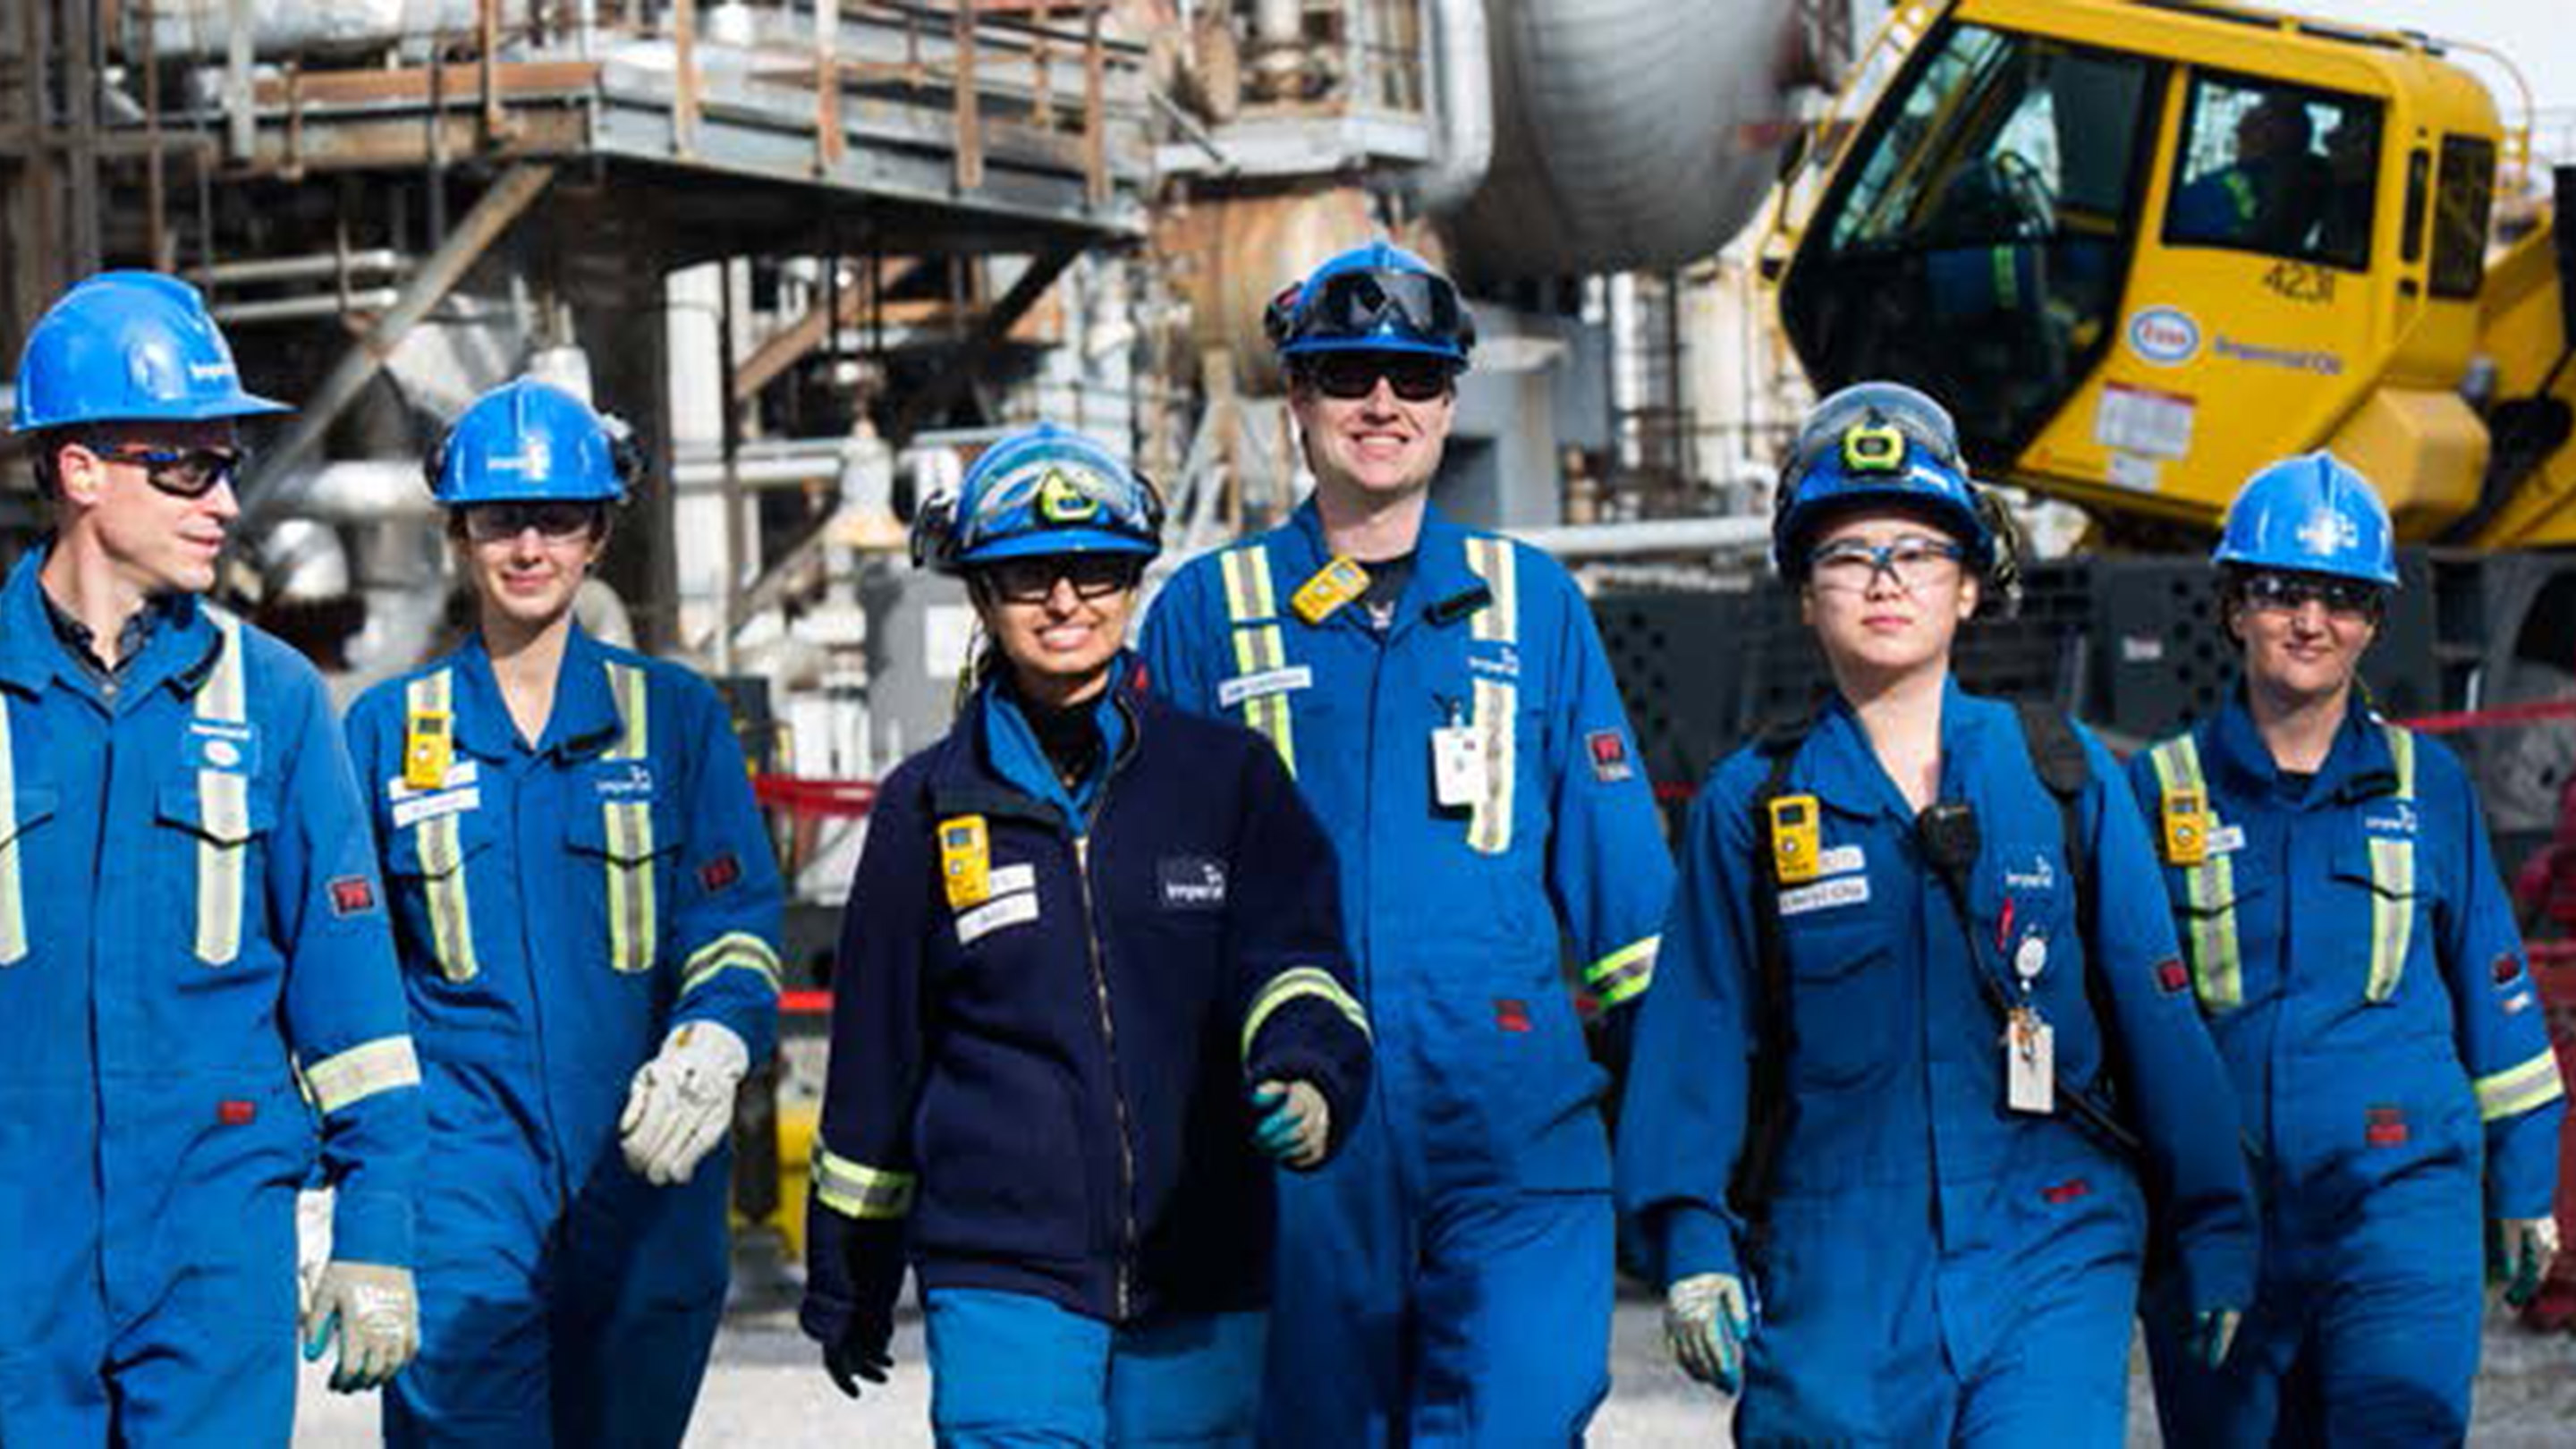 group of refinery workers in their PPE (personal protective equipment)